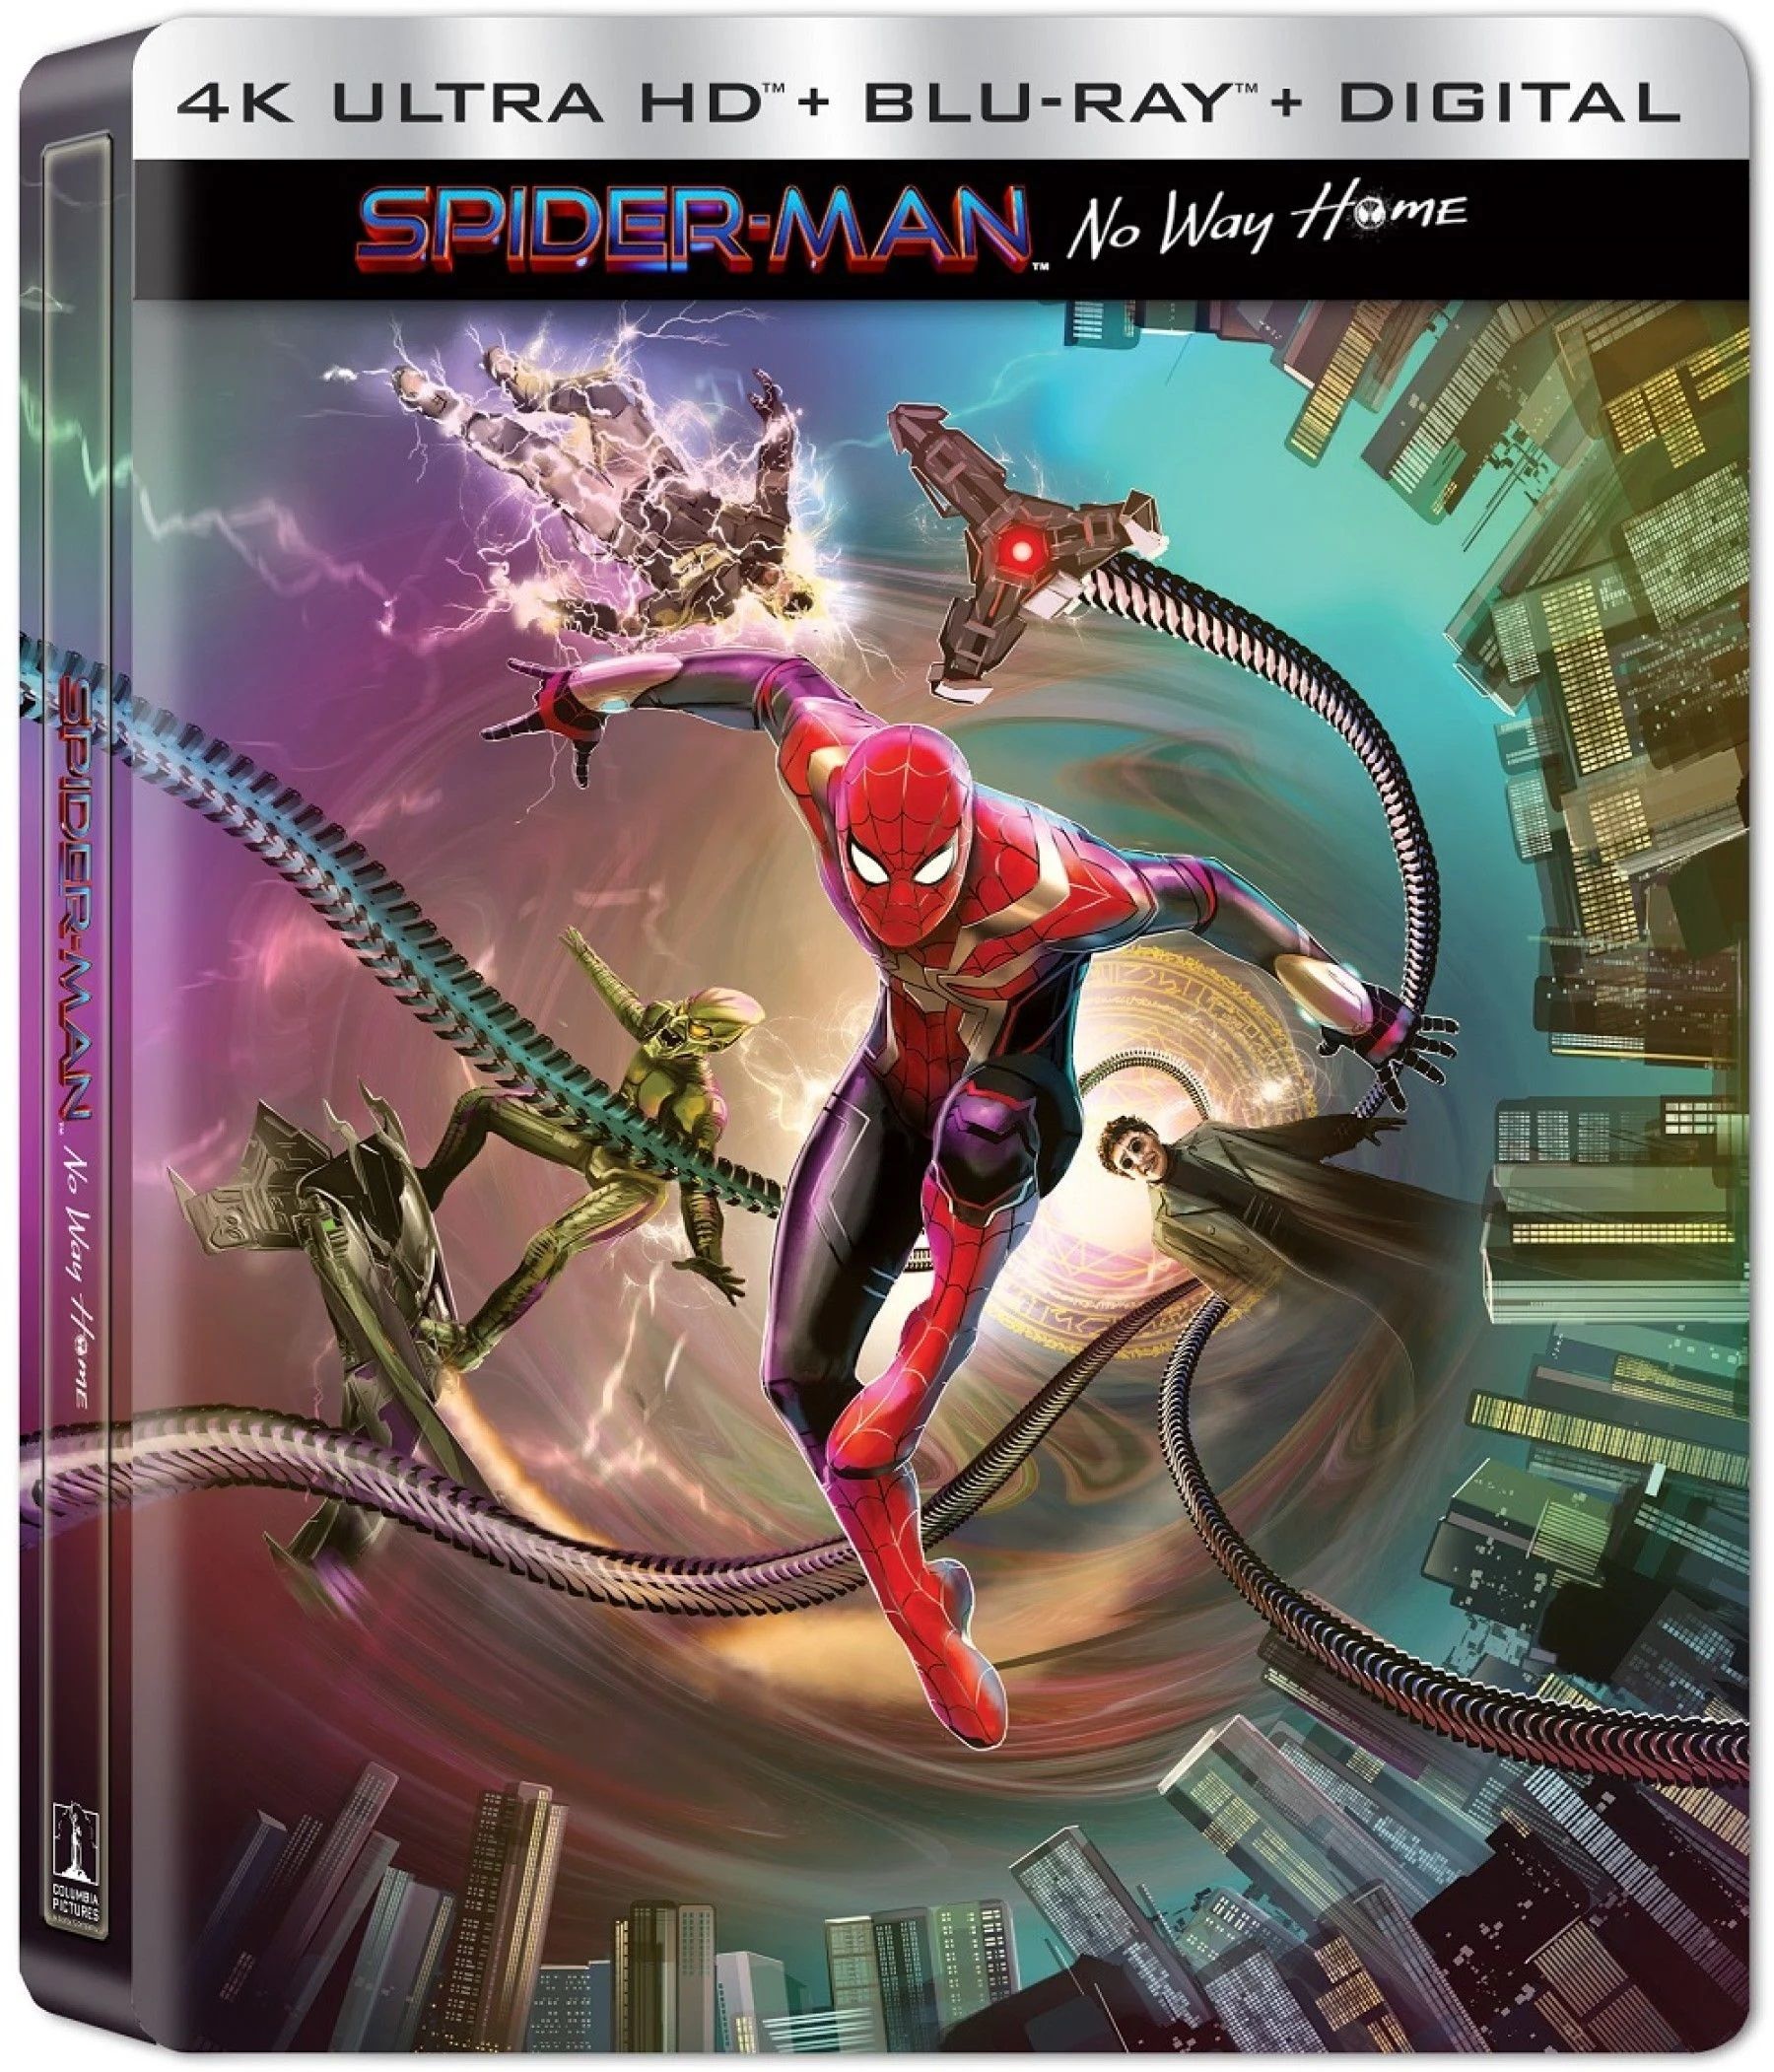 Tom Holland as Peter Parker alongside Green Goblin, Doctor Octopus and Electro on the steelbook cover of Spider-Man: No Way Home